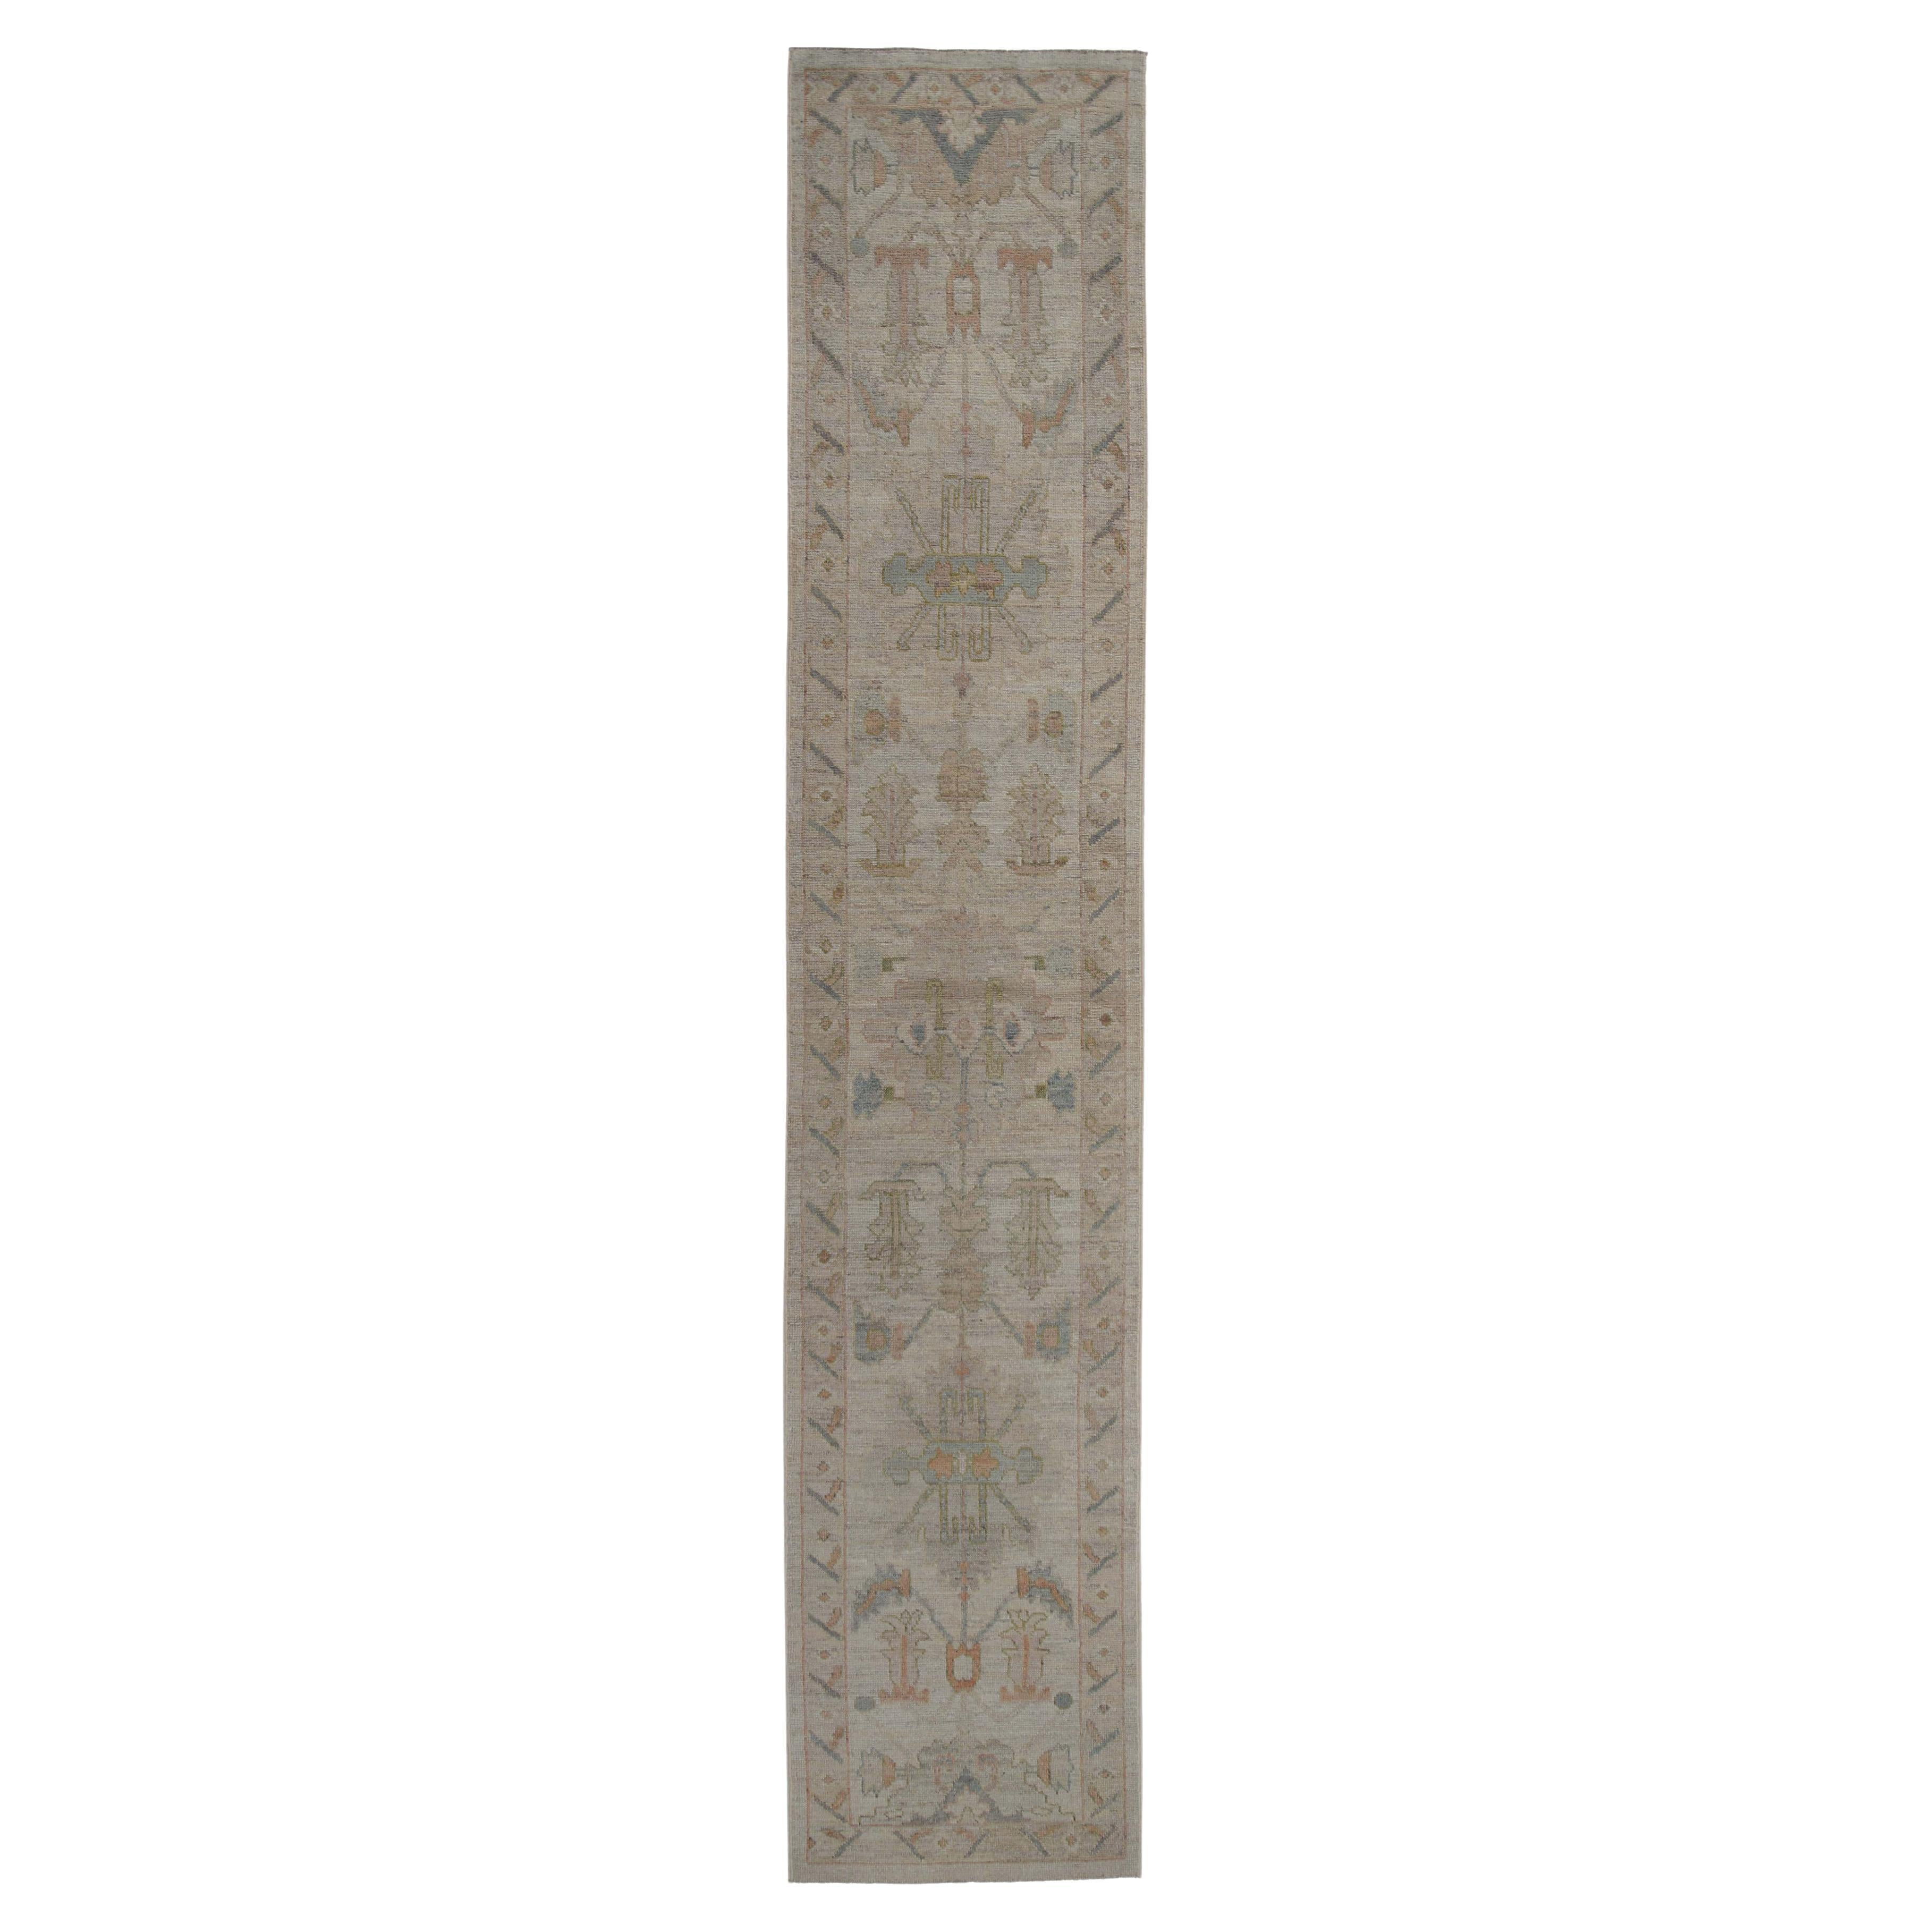 Faded Brown Turkish Sultanabad Runner Rug 